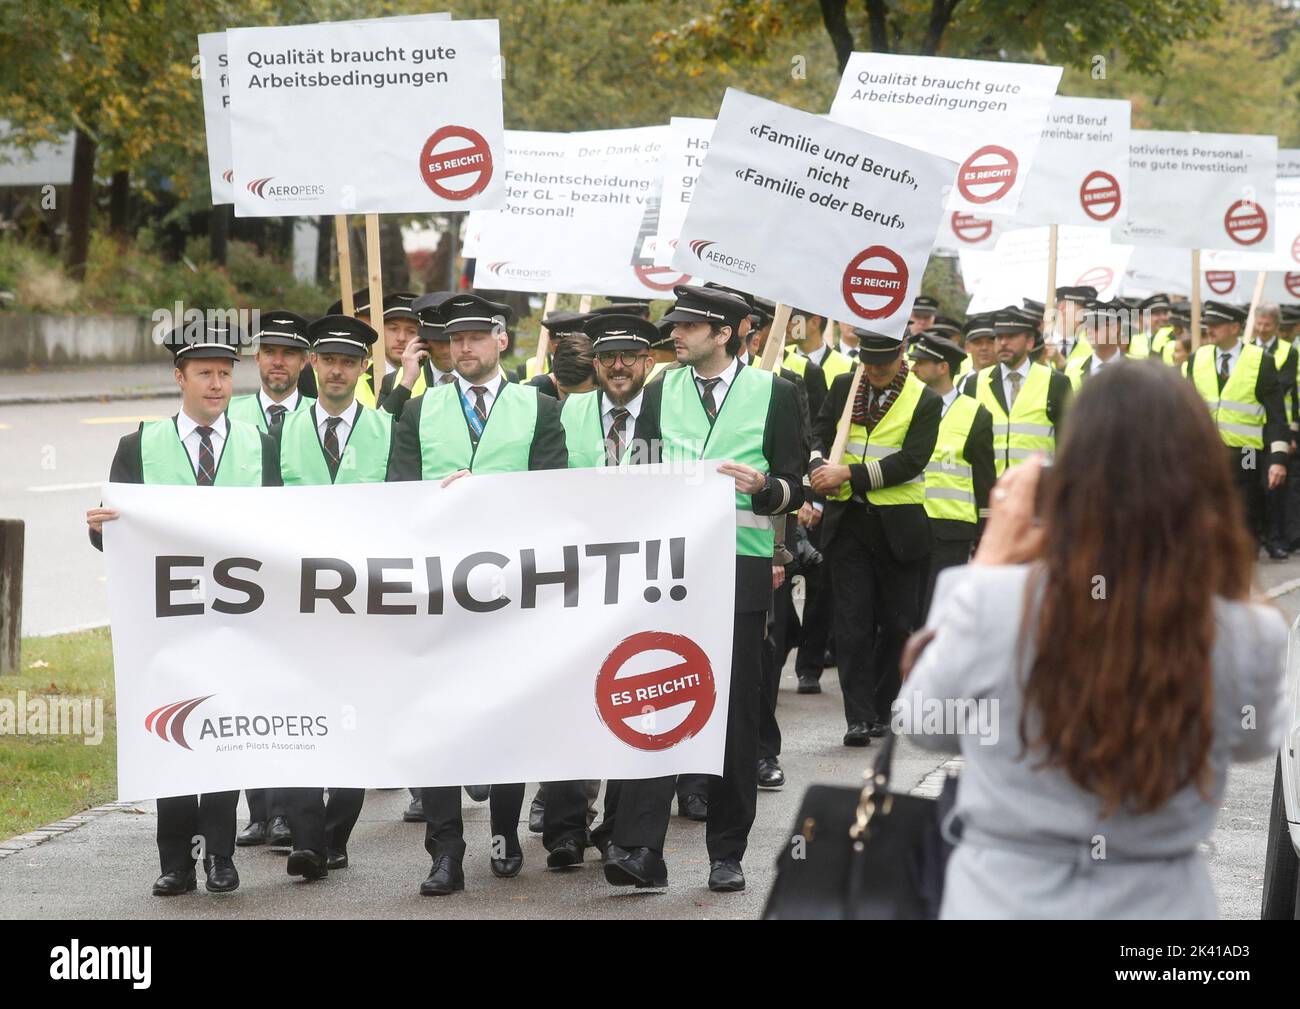 Members of AEROPERS - Airline Pilots Association carry posters on their march to protest in front of the headquarters of Swiss International Air Lines in Kloten, Switzerland September 29,  2022.  REUTERS/Arnd Wiegmann Stock Photo